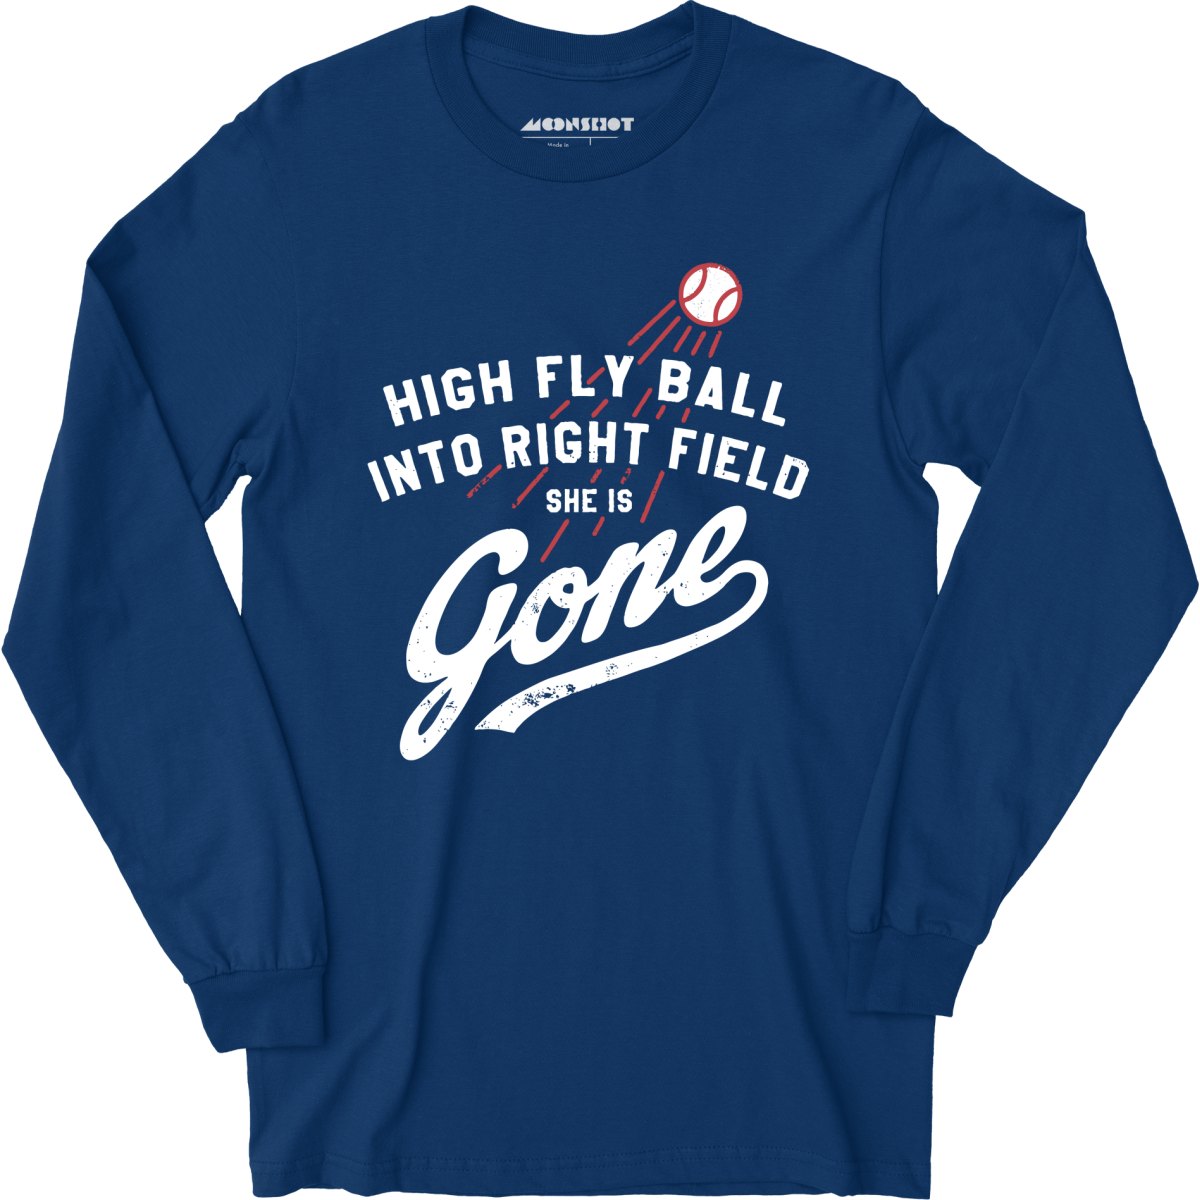 High Fly Ball Into Right Field She is Gone - Long Sleeve T-Shirt